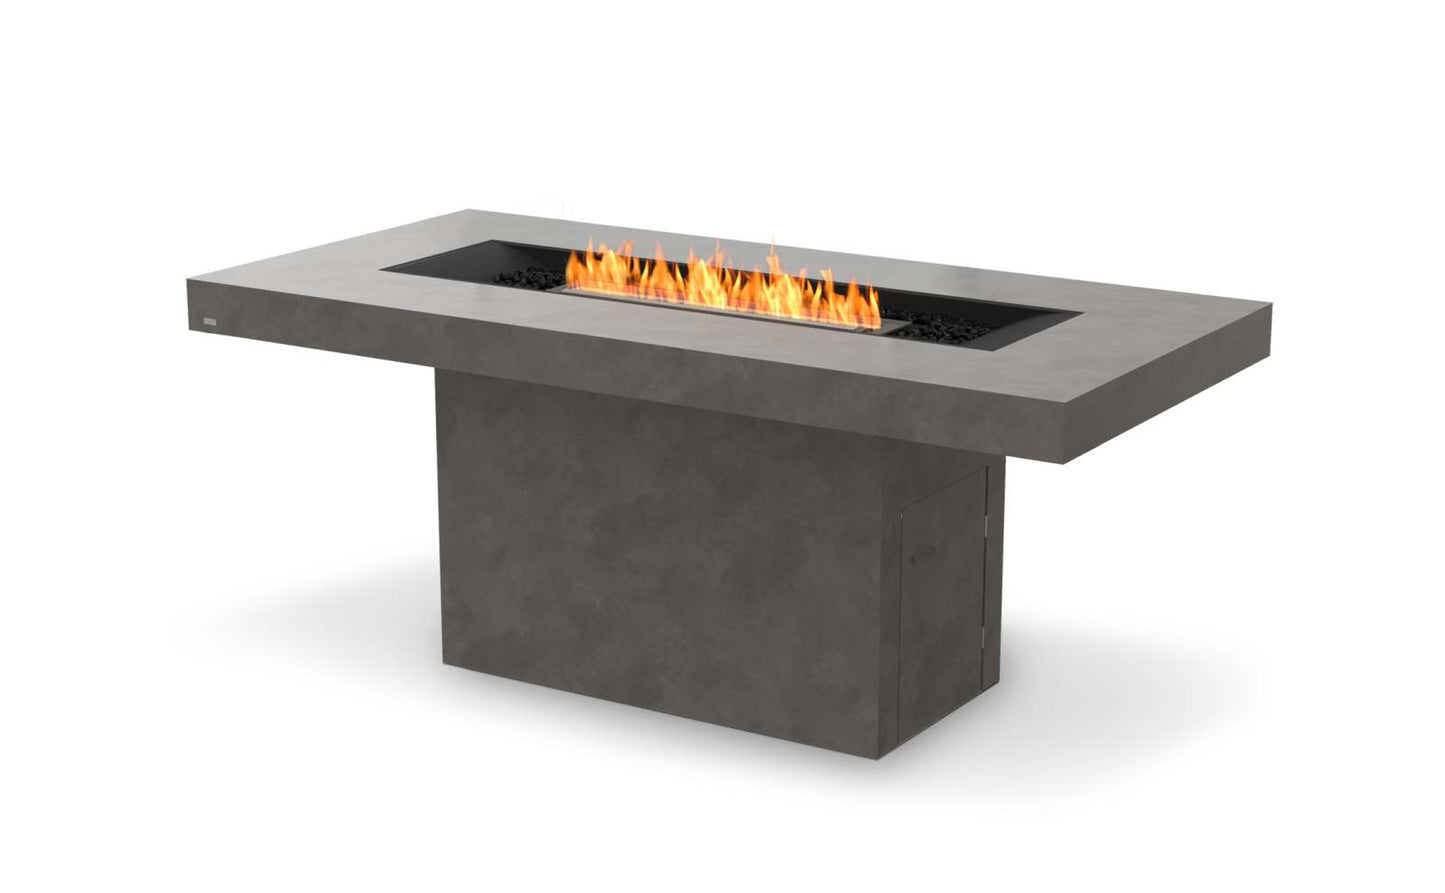 EcoSmart Fire - Gin 90 (Bar) - Fire Pit Table - Natural